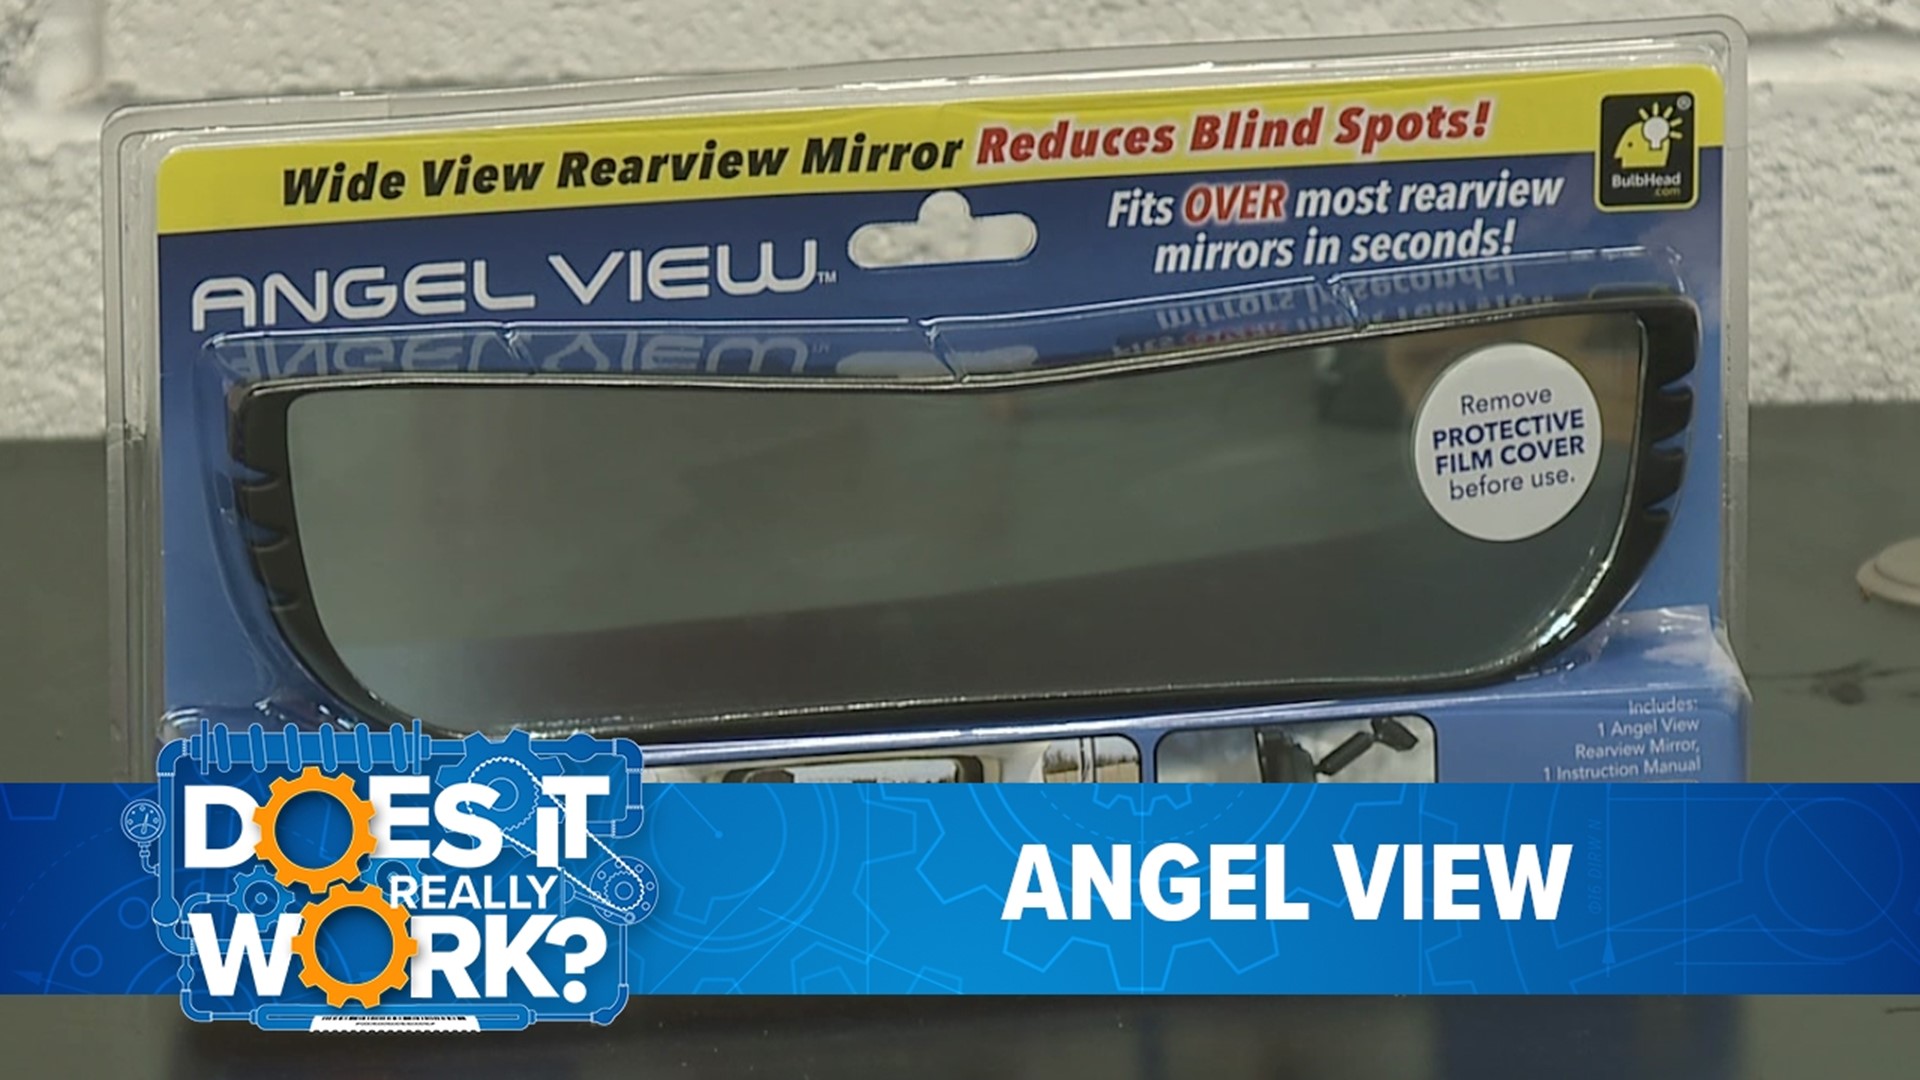 Inspired by race car drivers, Angel View uses wide-angle technology to give you a panoramic view of what's behind you.